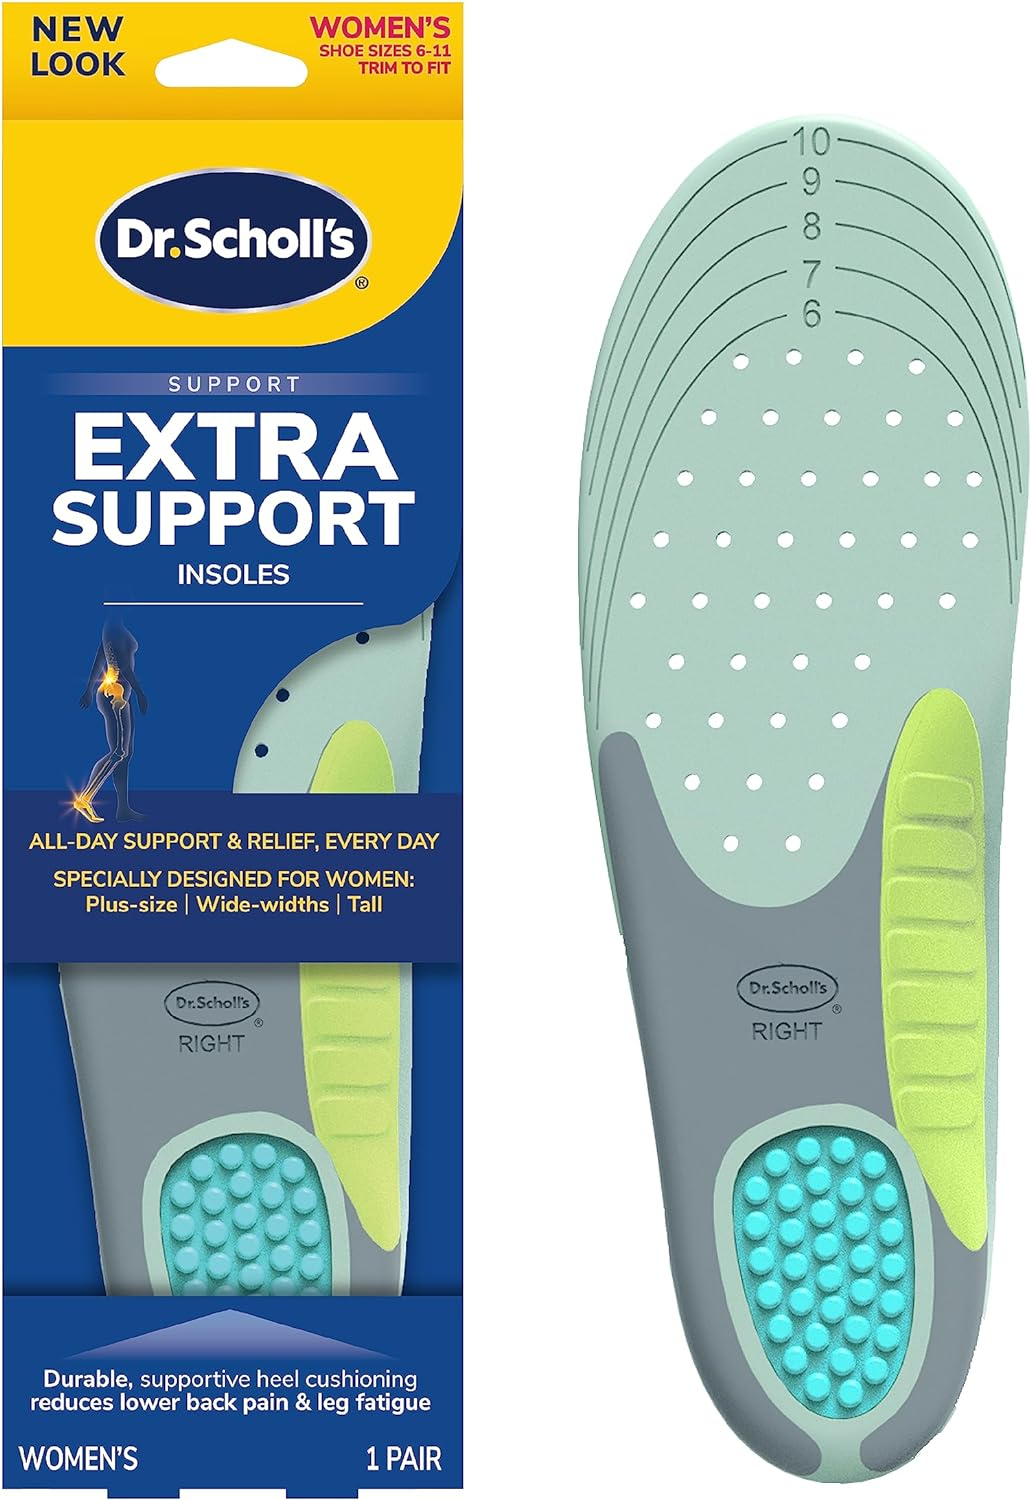 Dr. Scholl's Extra Support Insoles for Women, Size 6-11, 1 Pair, Trim to Fit Inserts $9.31